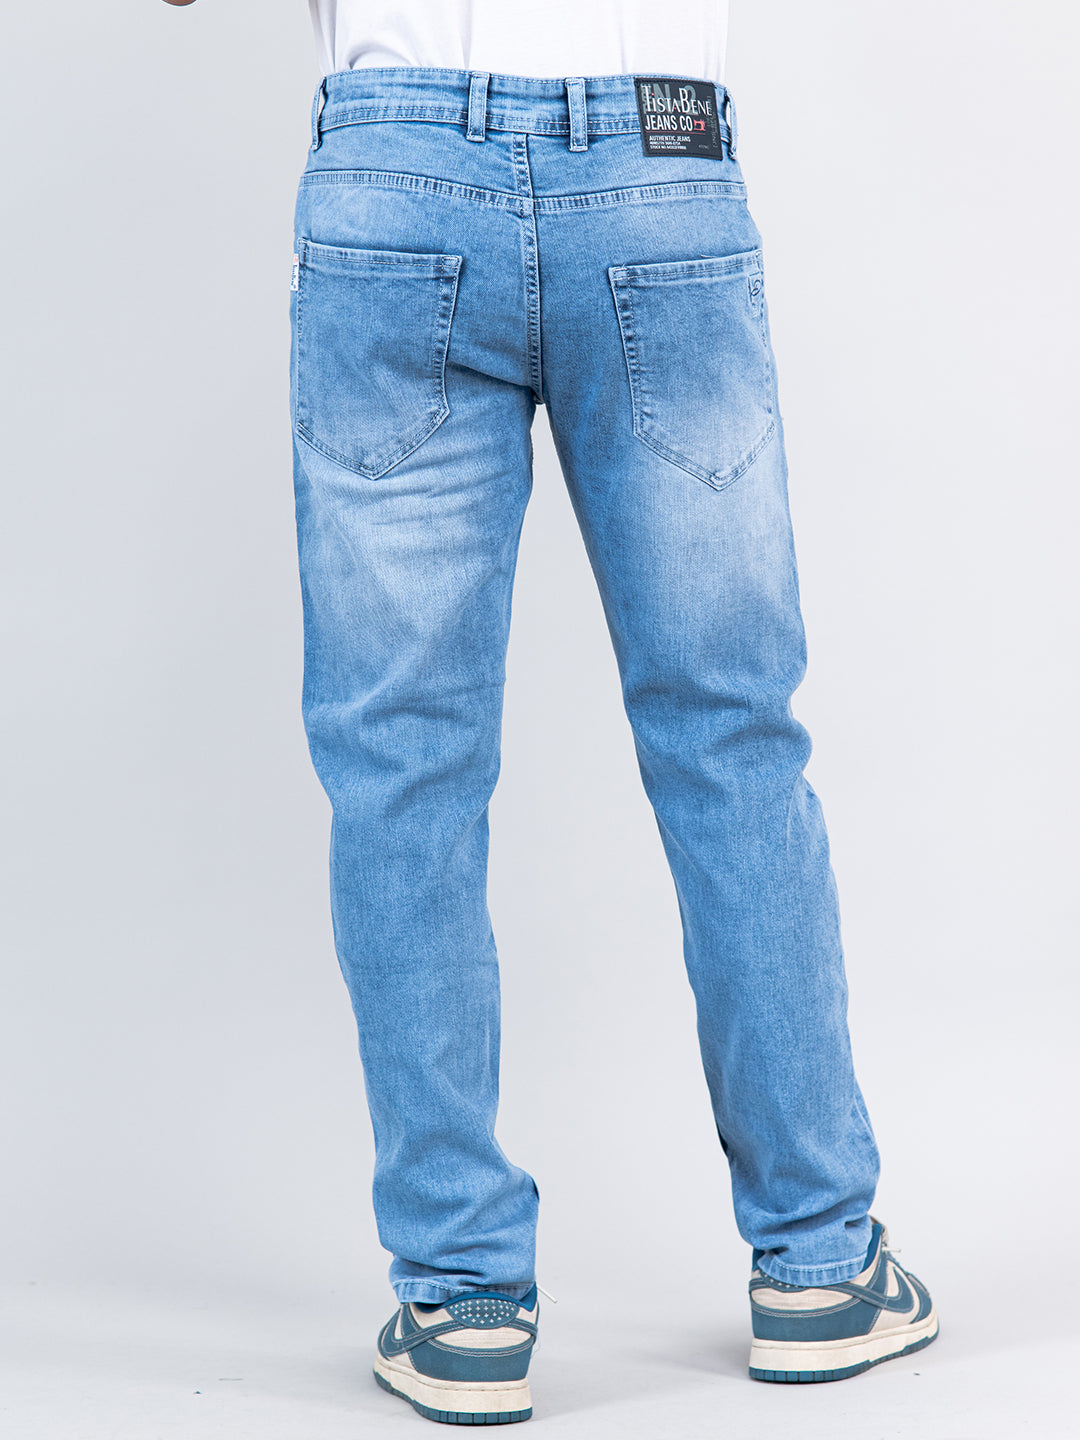 What to Wear with Light Blue Jeans | Democracy Clothing